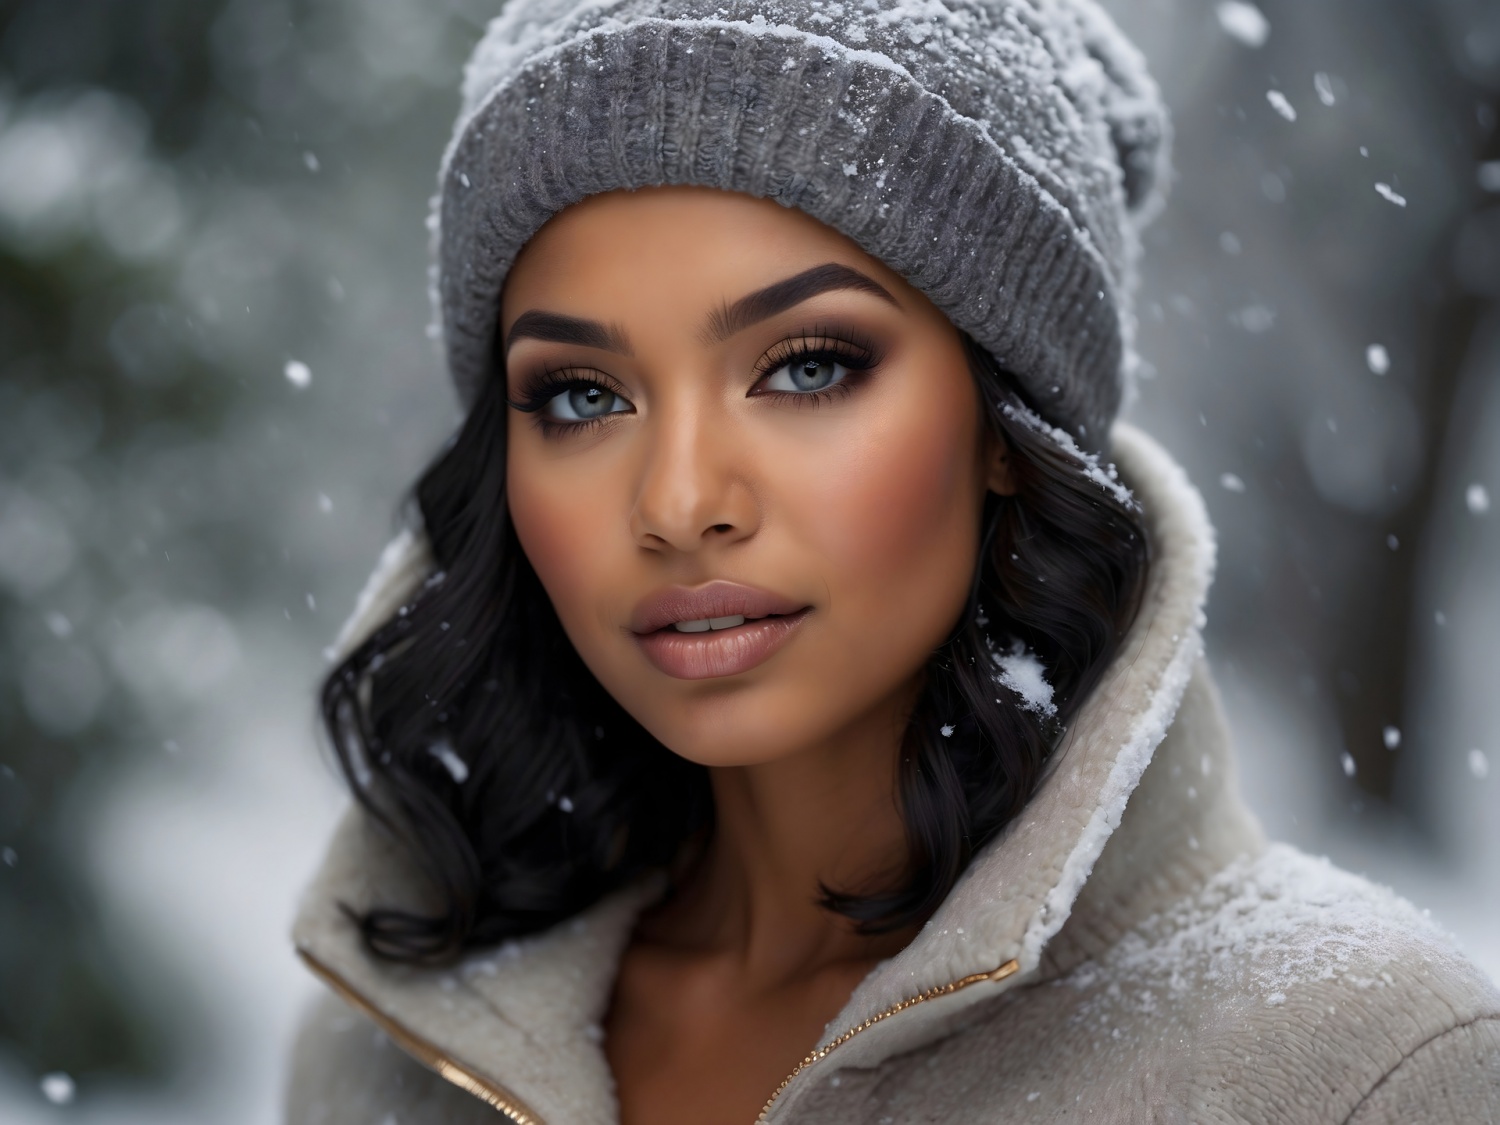 Water-Based Makeup Products for Dewy Skin This Winter